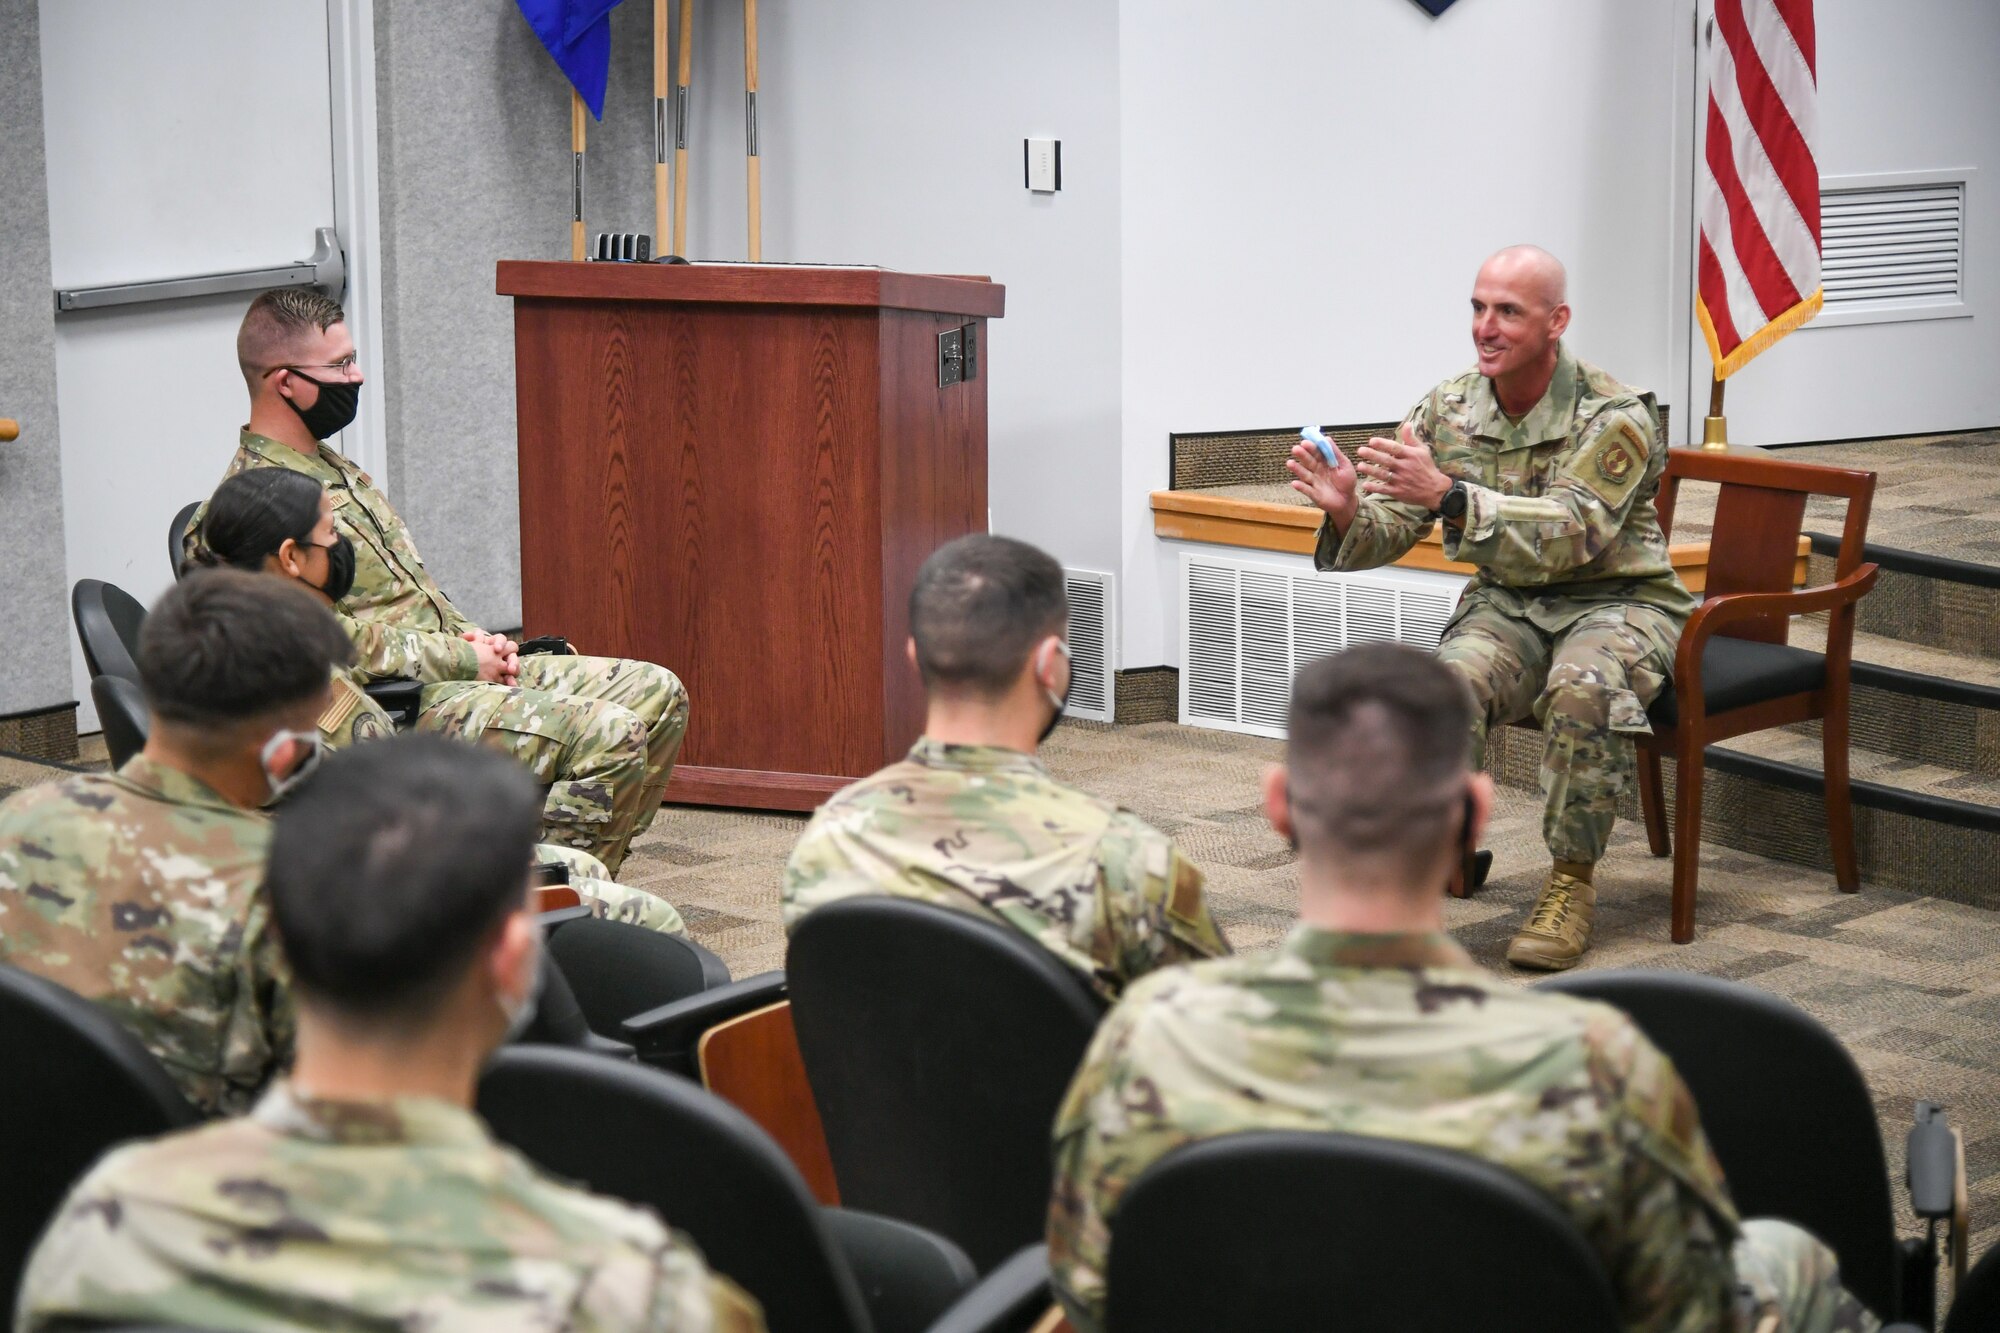 Chief Master Sgt. David Flosi, Air Force Sustainment Center commander chief master sergeant, visits with Airmen